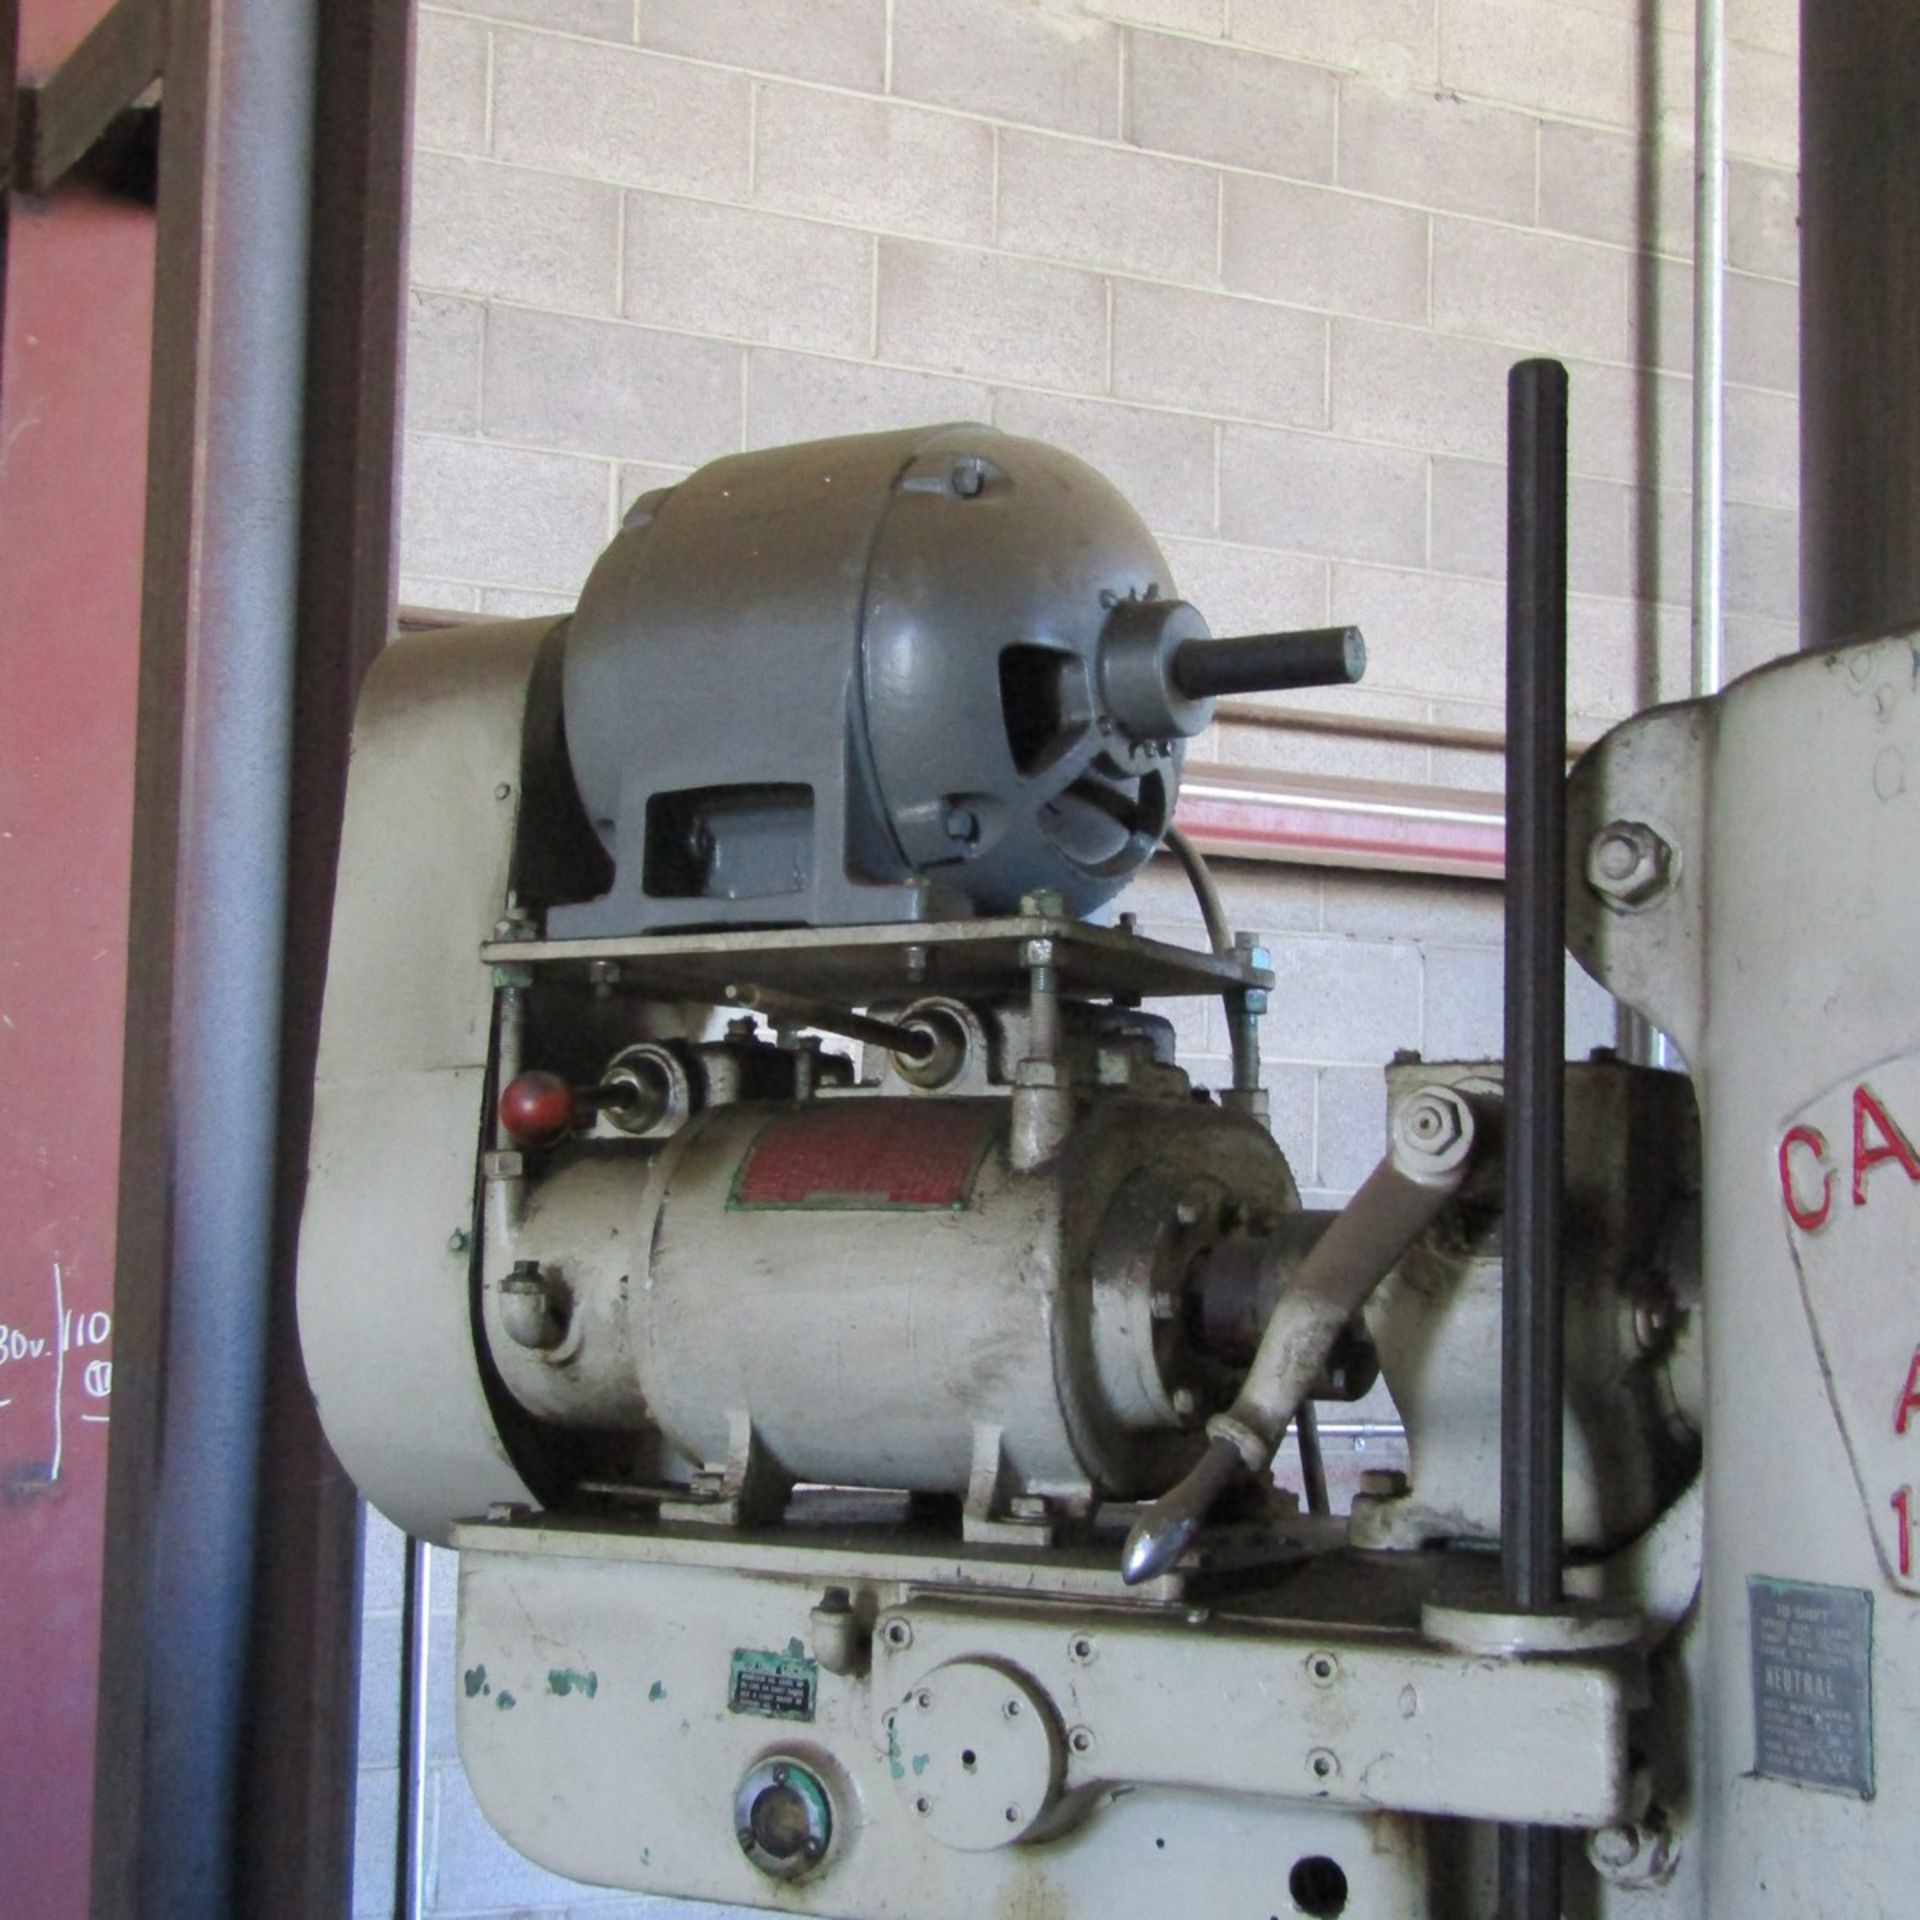 Carlton 5' x 15" Radial Arm Drill 15" Column, 5' Arm, 15 to 1500 RPM, 26" x 33" T-Slotted Box Table - Image 4 of 8